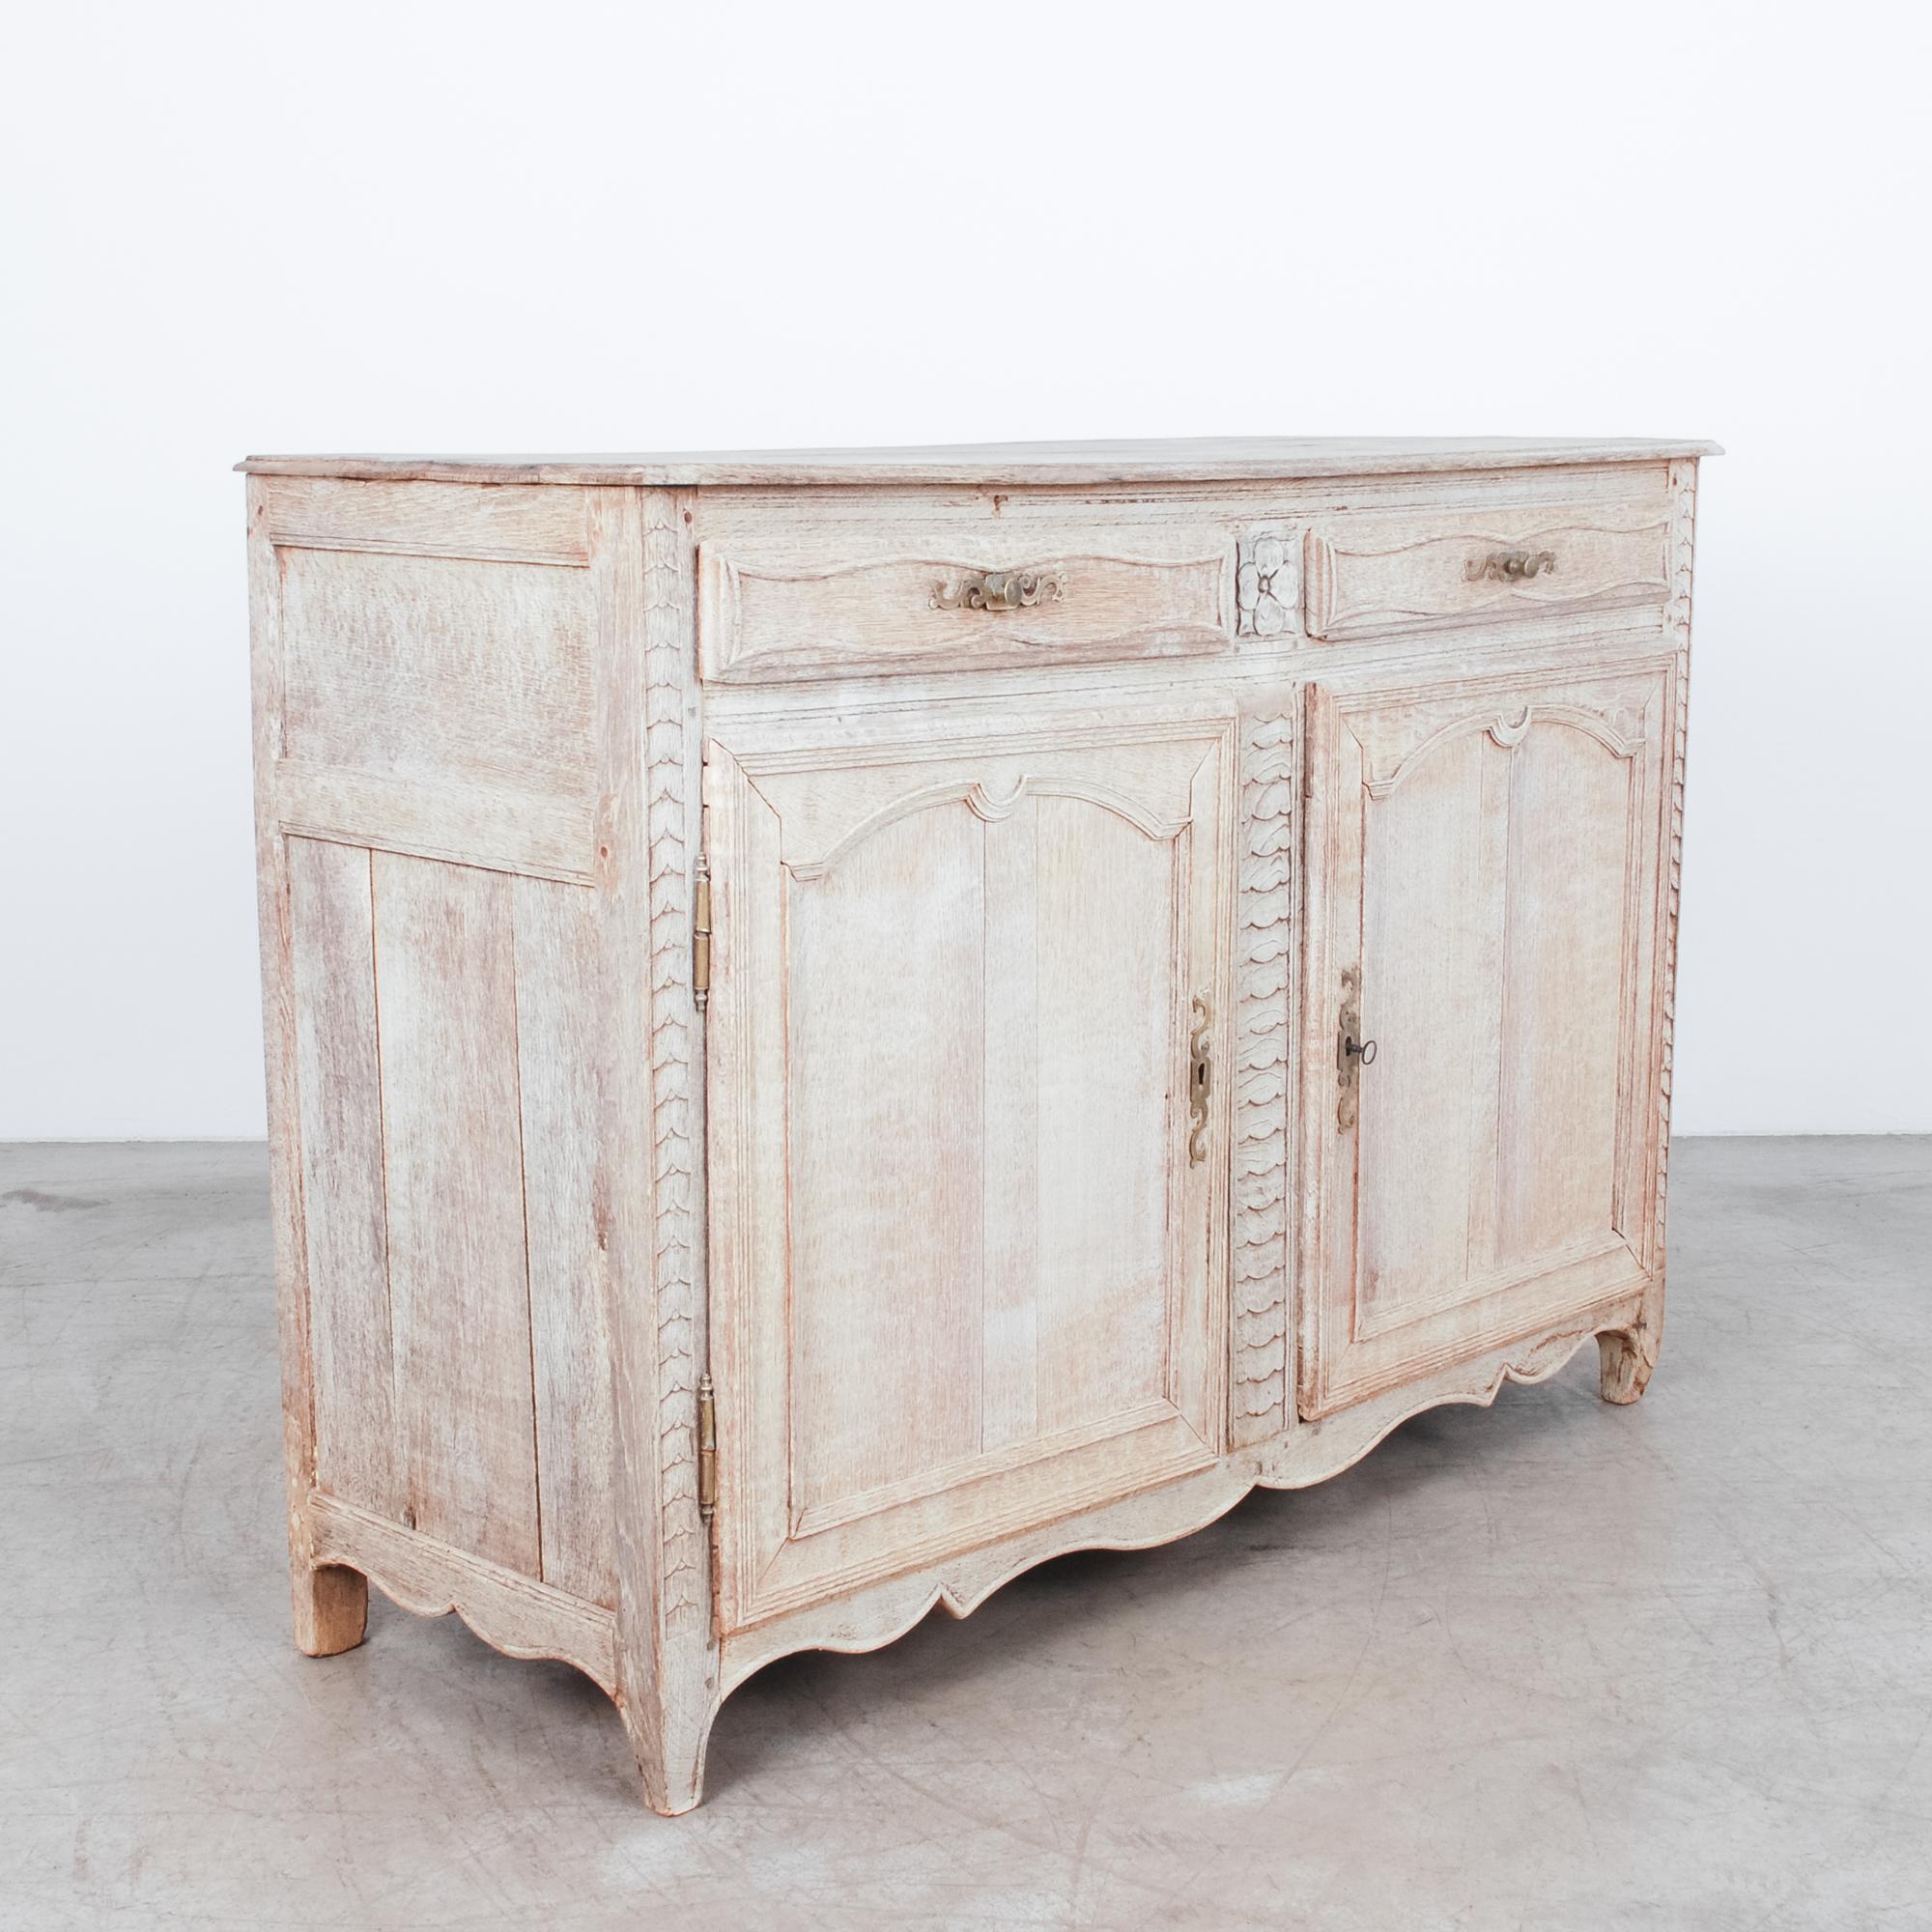 French Provincial Mid-19th Century Bleached Oak Buffet Cabinet